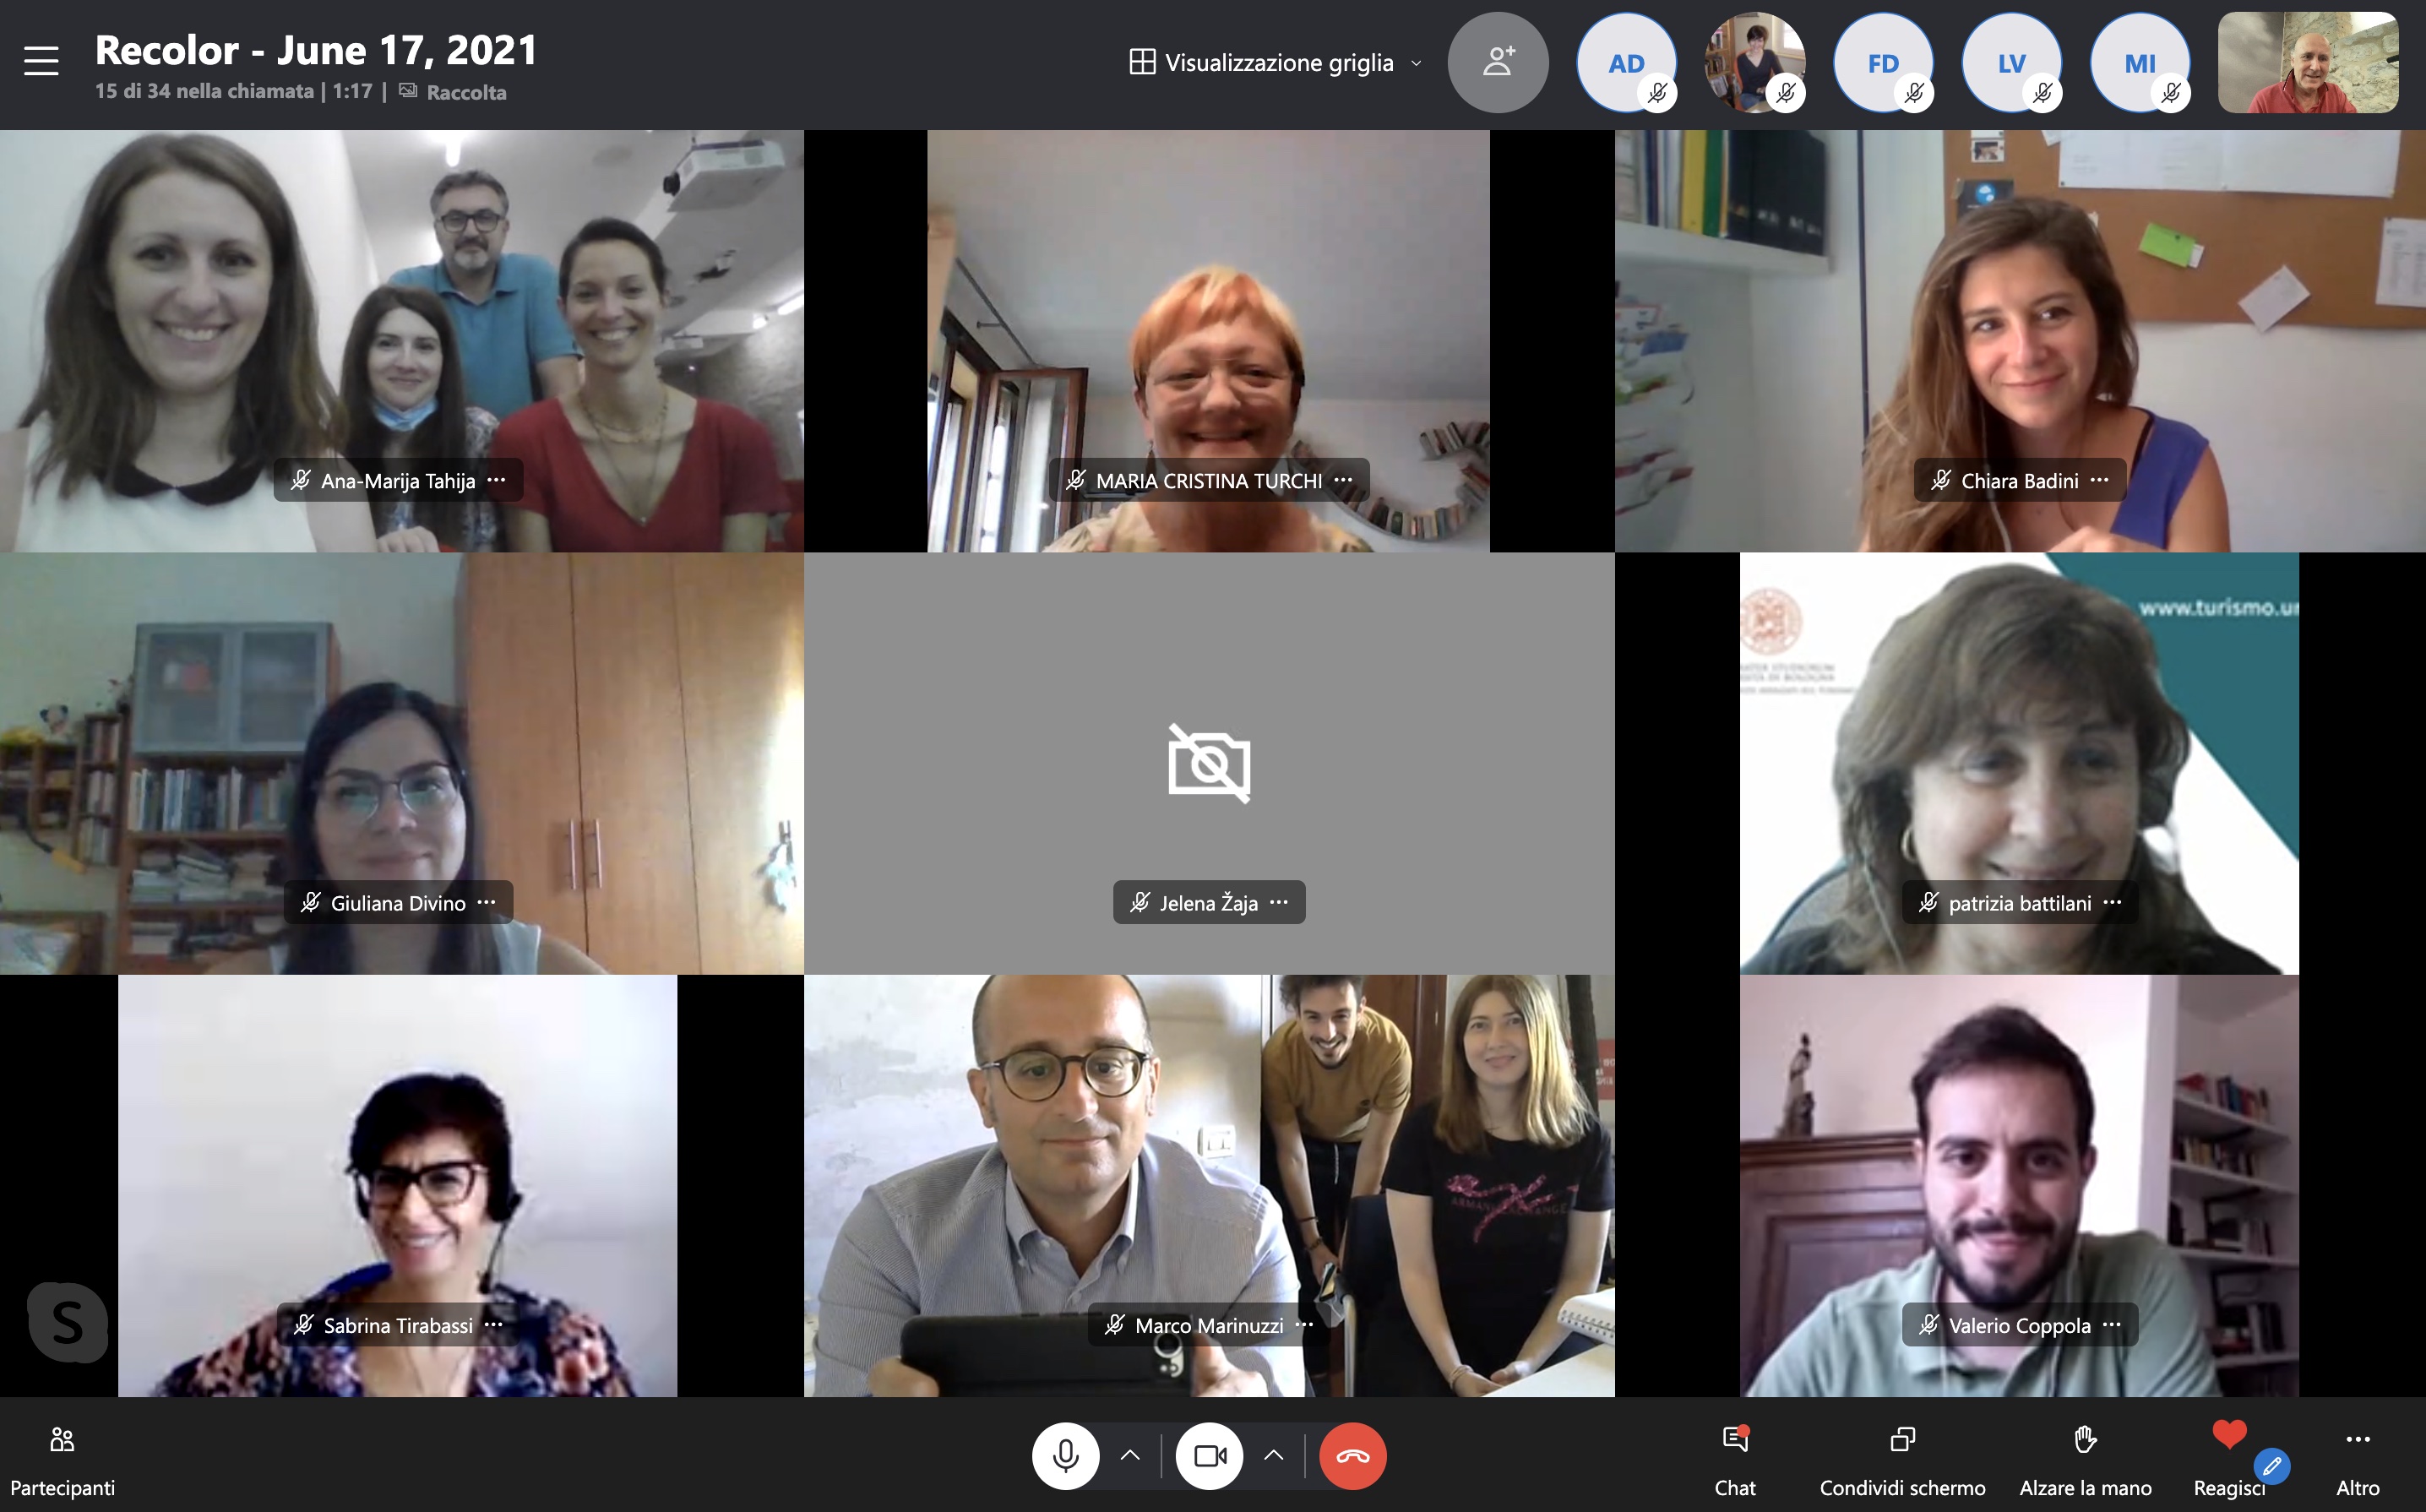 Transnational Meeting No. 7 held online & in person